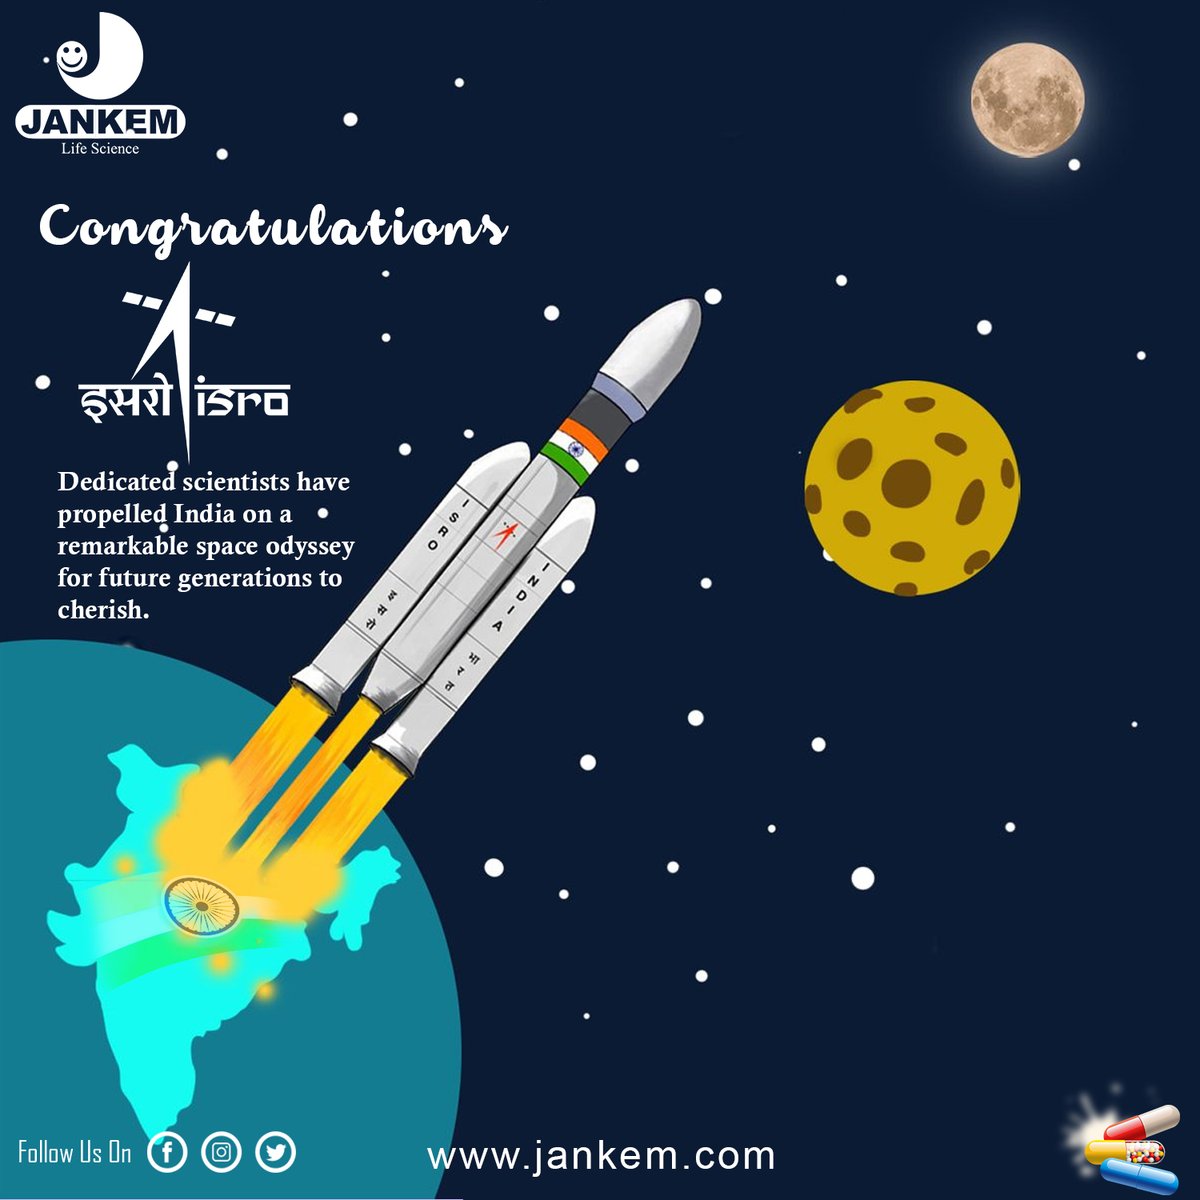 Celebrating India's Space Odyssey! These dedicated scientists have paved the way for an incredible space journey, inspiring generations to come!

#SpaceOdyssey #IndianSpaceMission #ProudlyIndian #SpaceExploration #InspiringGenerations #ScienceHeroes